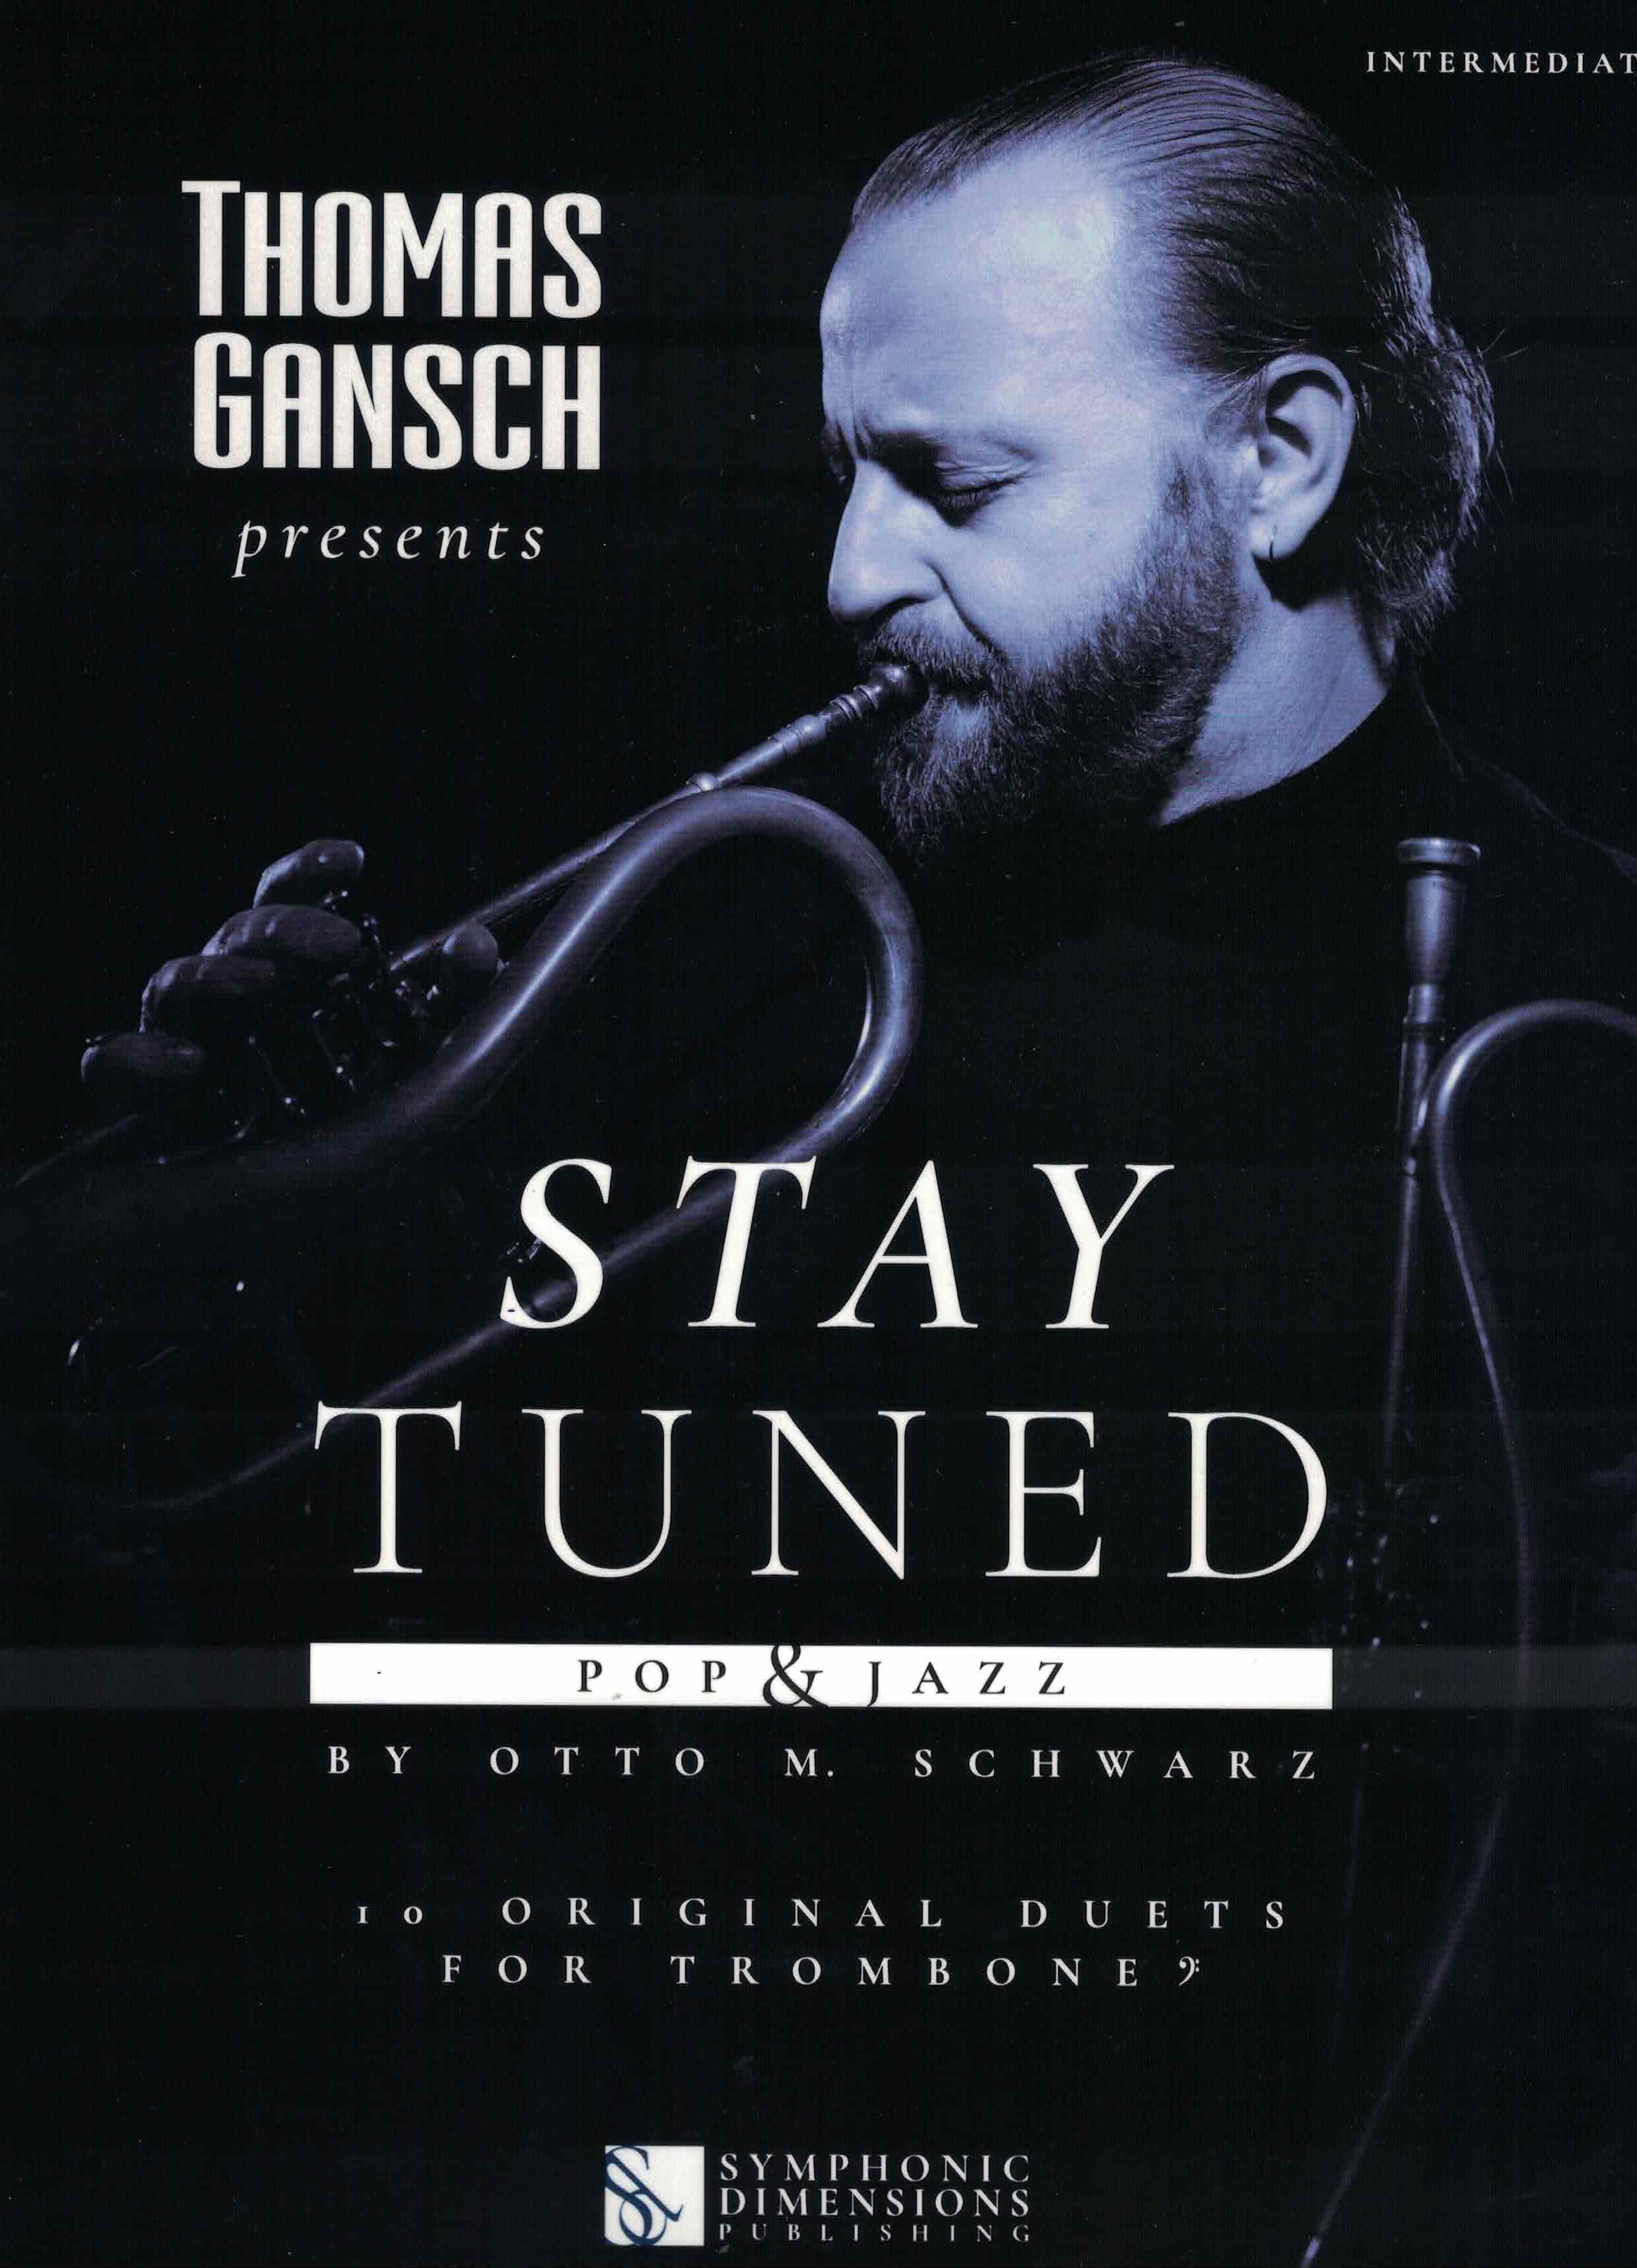 Stay tuned - 10 original Duets for Trumpet O.M. Schwarz